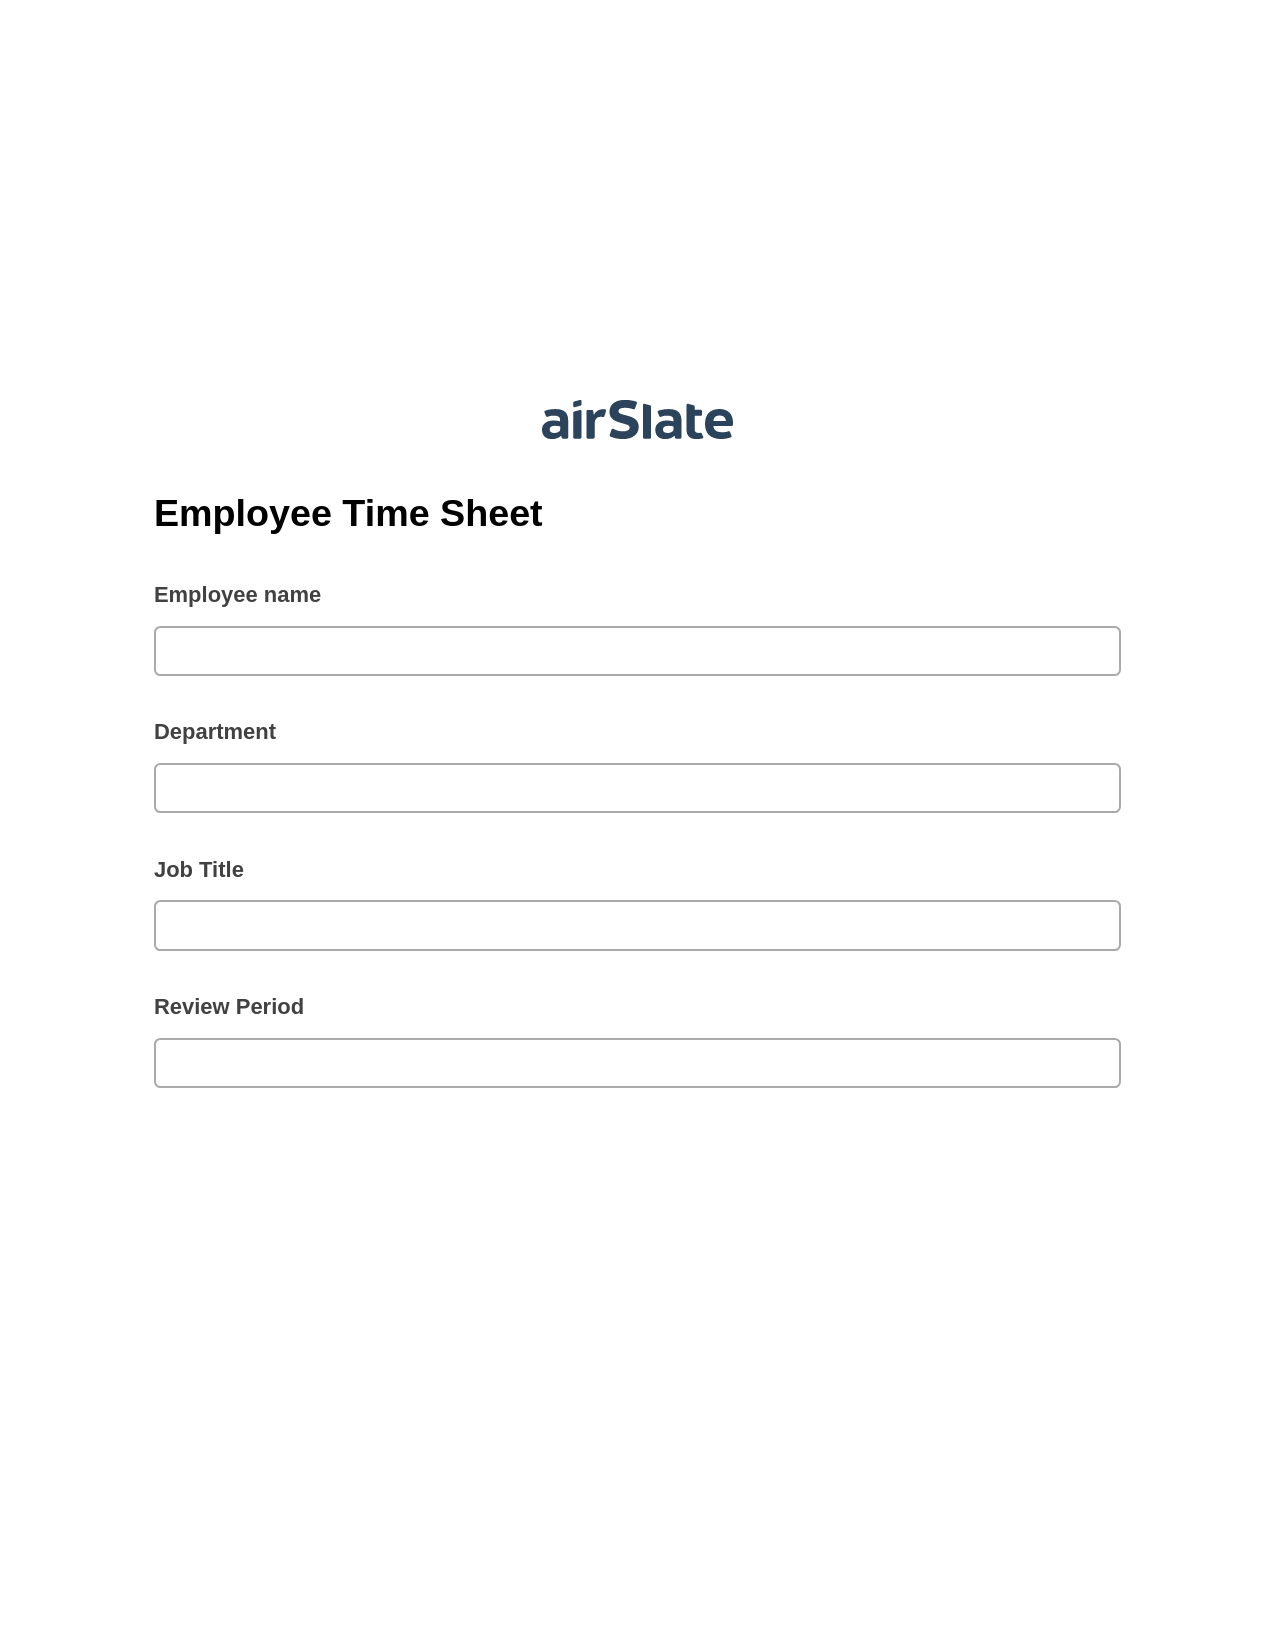 Employee Time Sheet Pre-fill from Excel Spreadsheet Bot, Create slate addon, Archive to Google Drive Bot